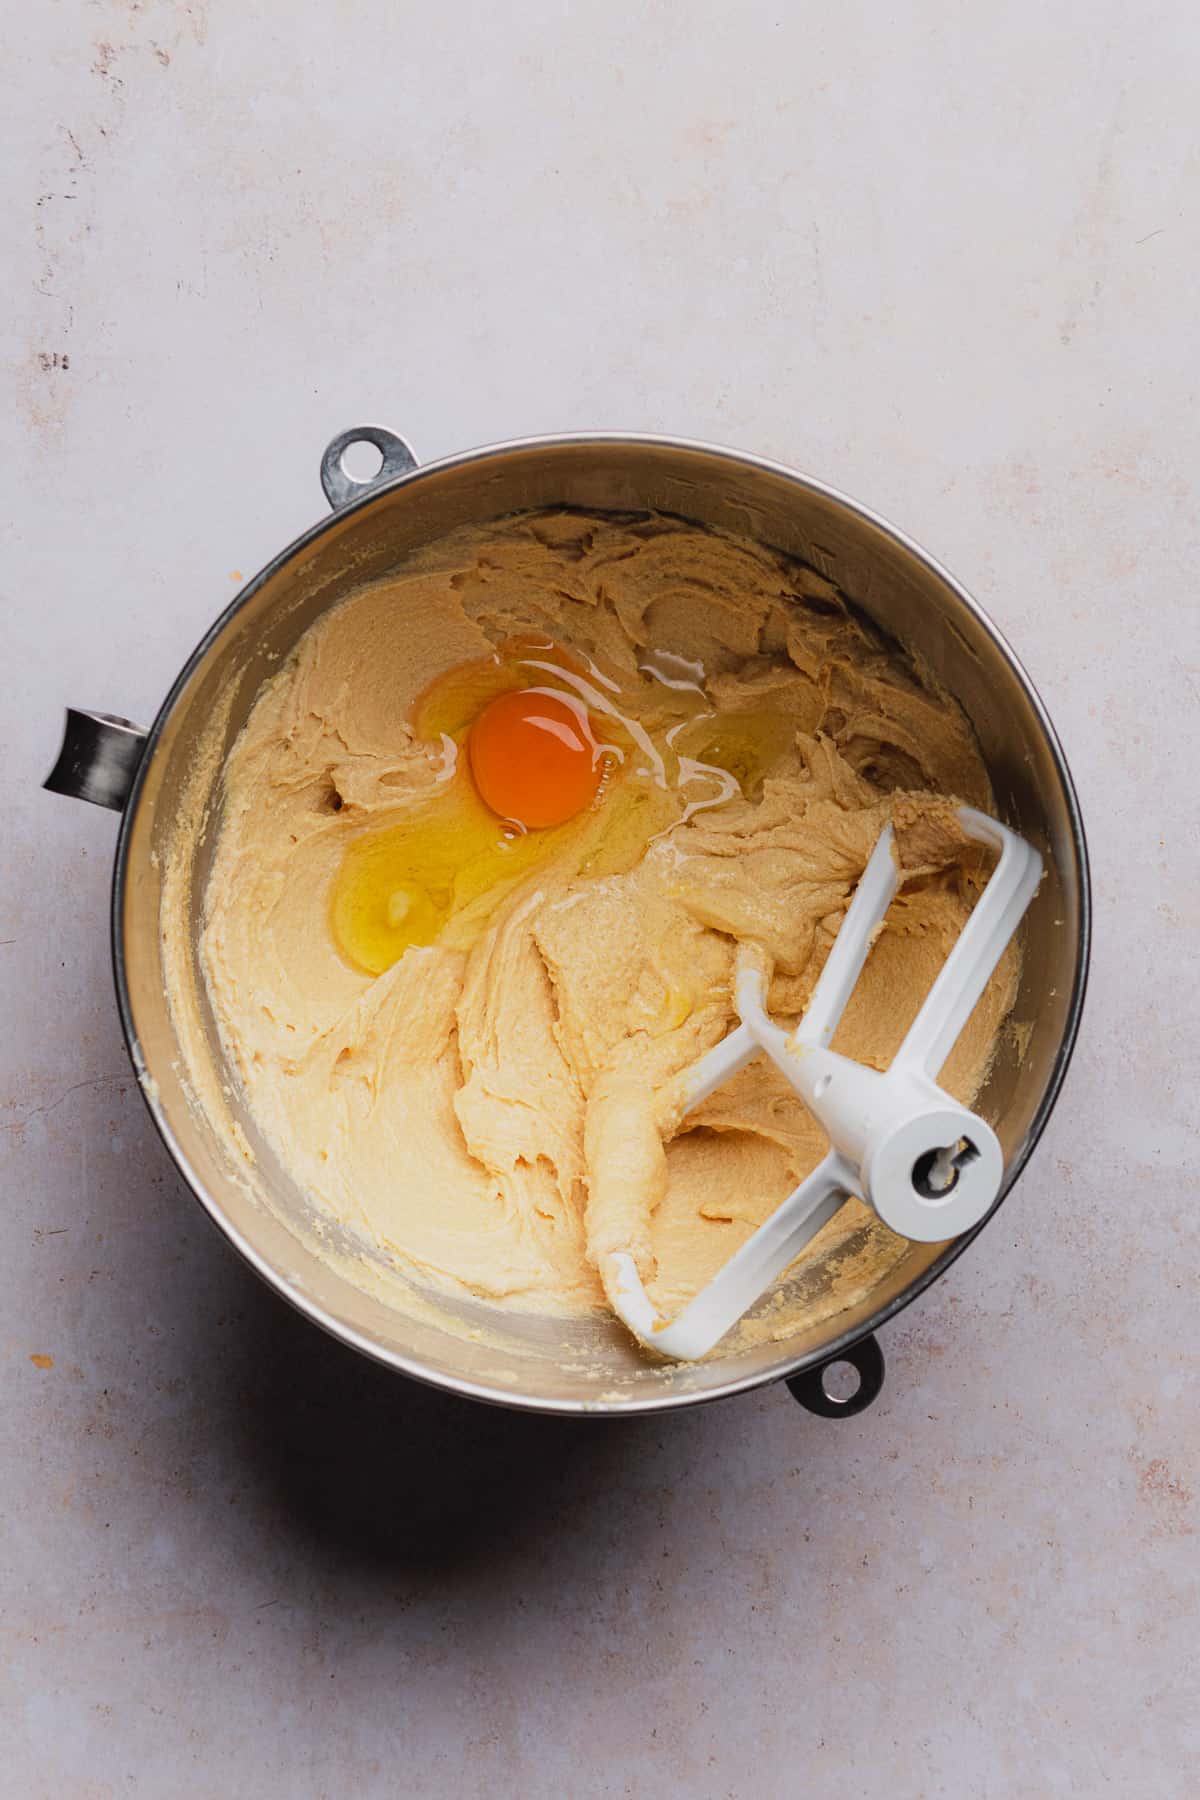 creamed wet ingredients in a bowl with an egg yolk